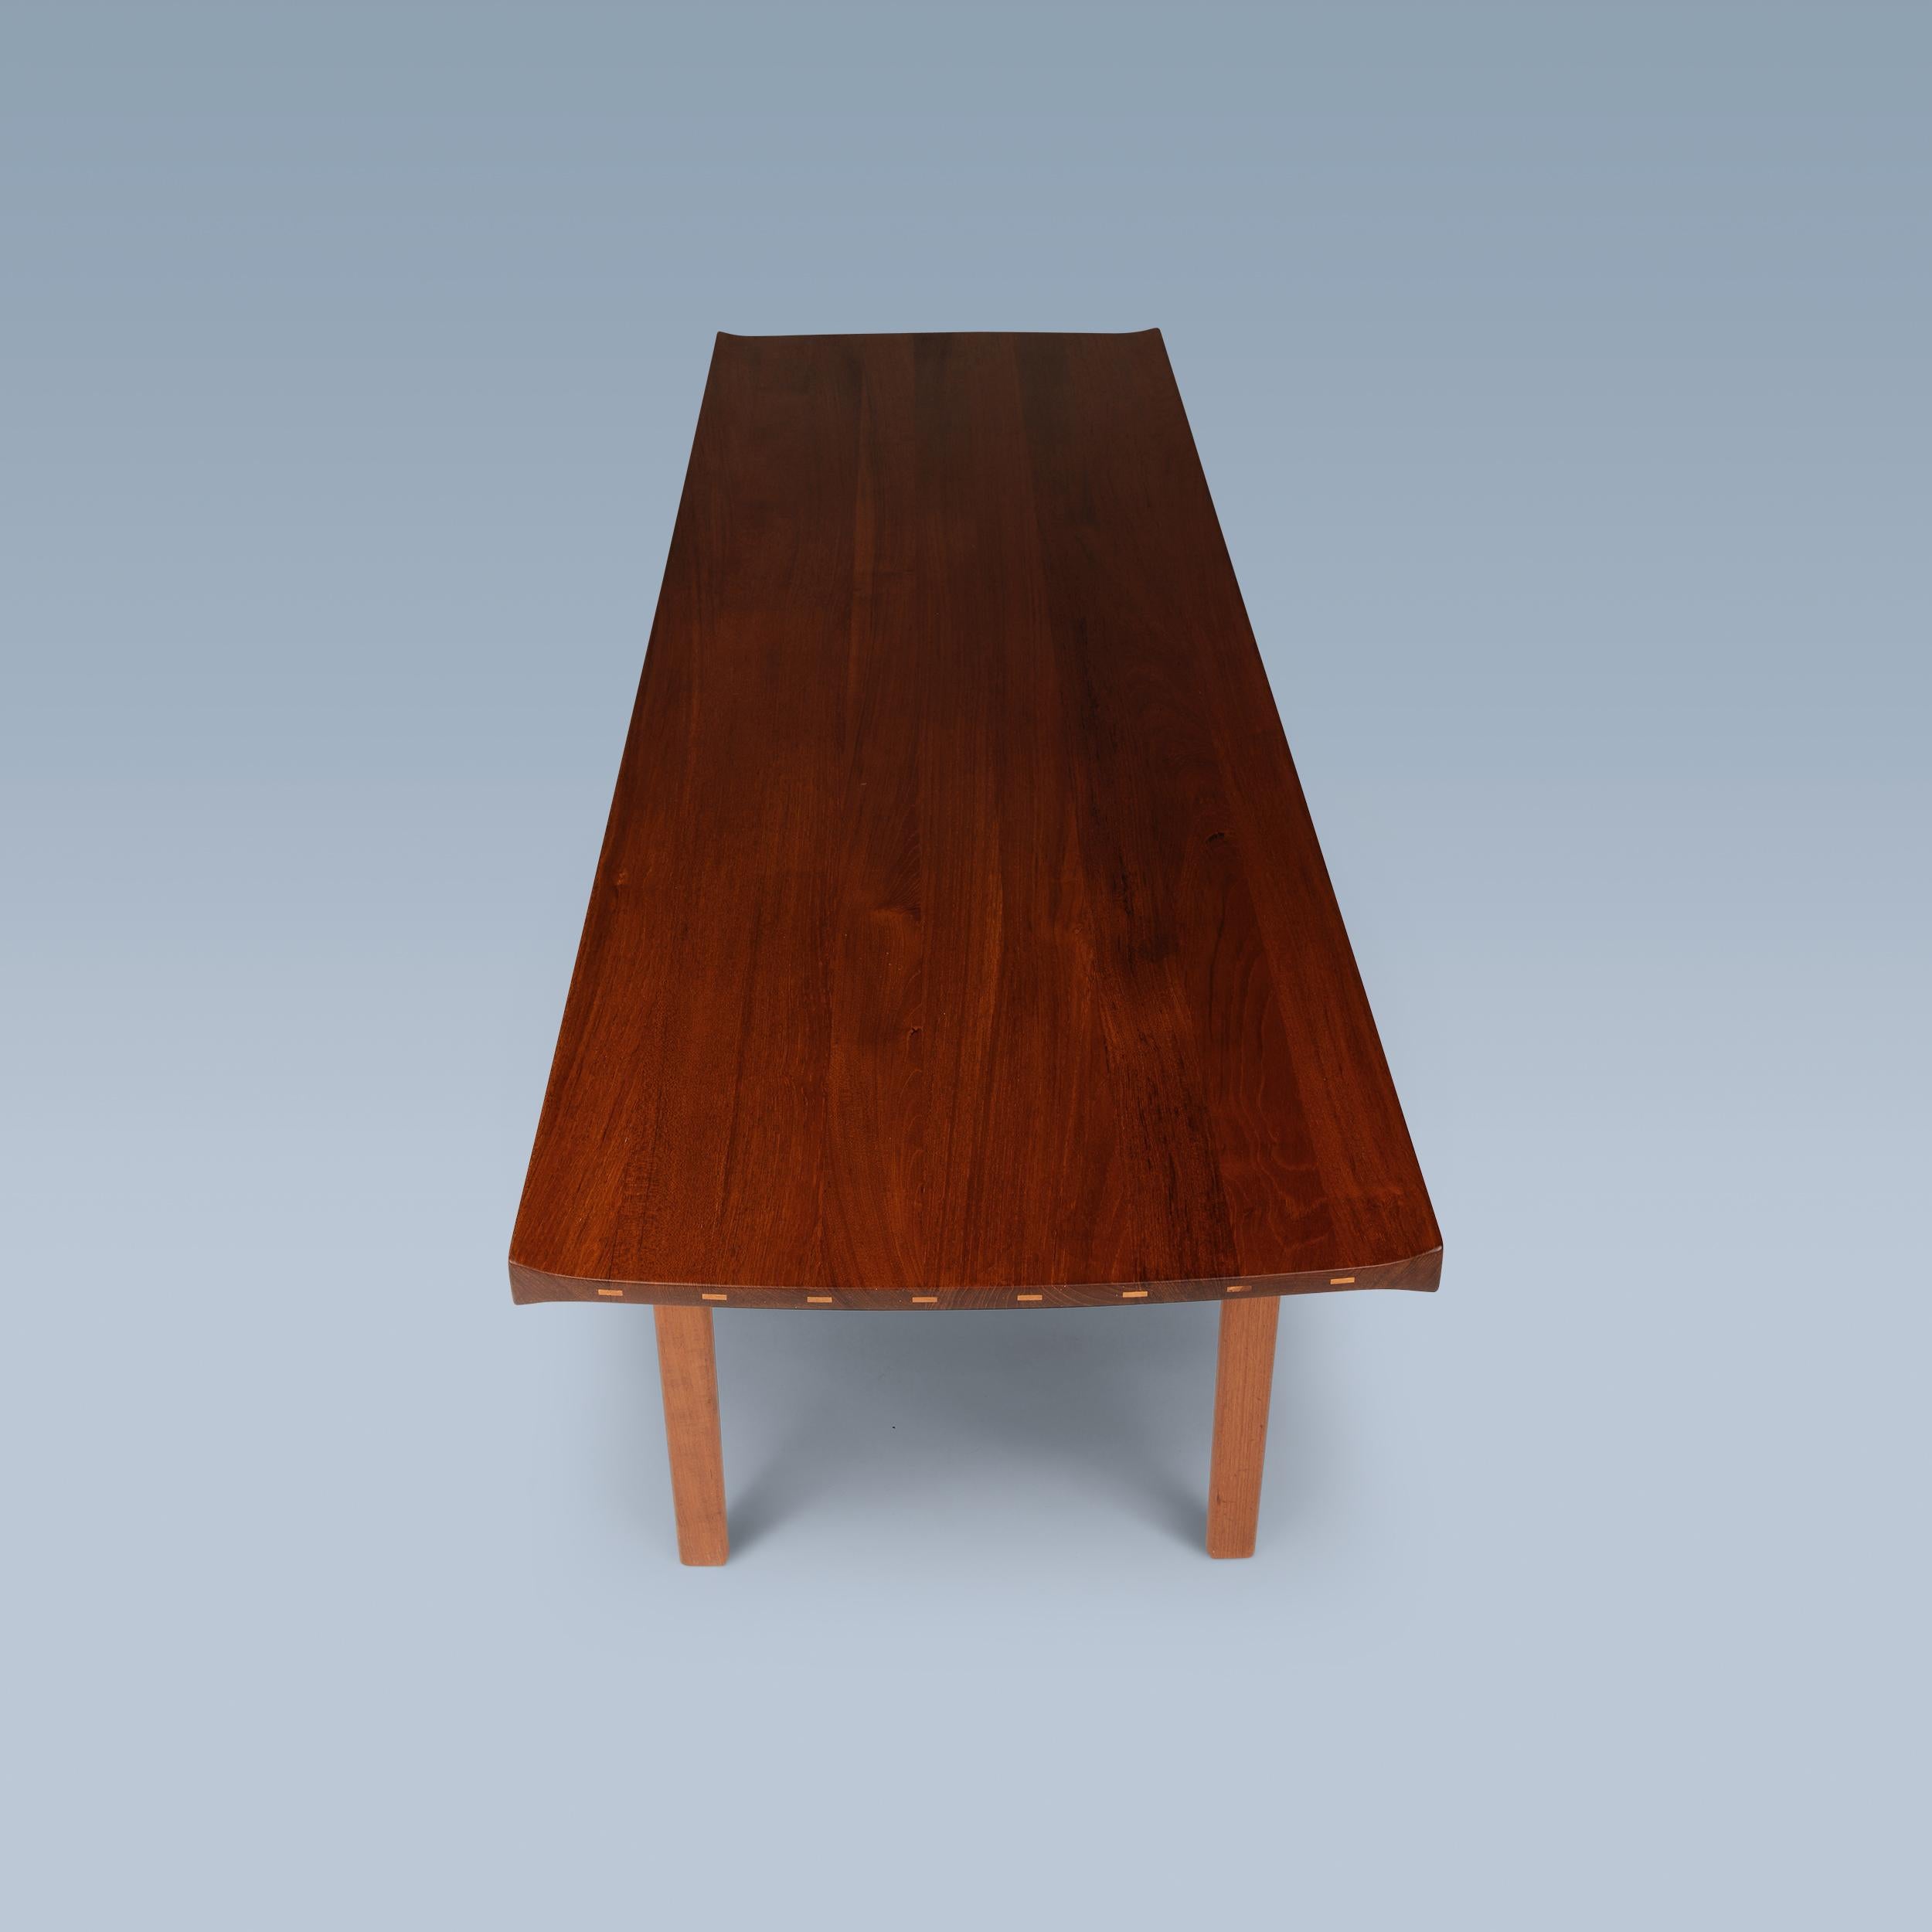 This teak coffee table with contrasting birch details is by Tove og Edvard Kindt-Larsen.
This Danish architects husband and wife Tove & Edvard Kindt-Larsen designed it for the Swedish furniture manufacturer Säffle Möbelfabrik.
It is made from solid